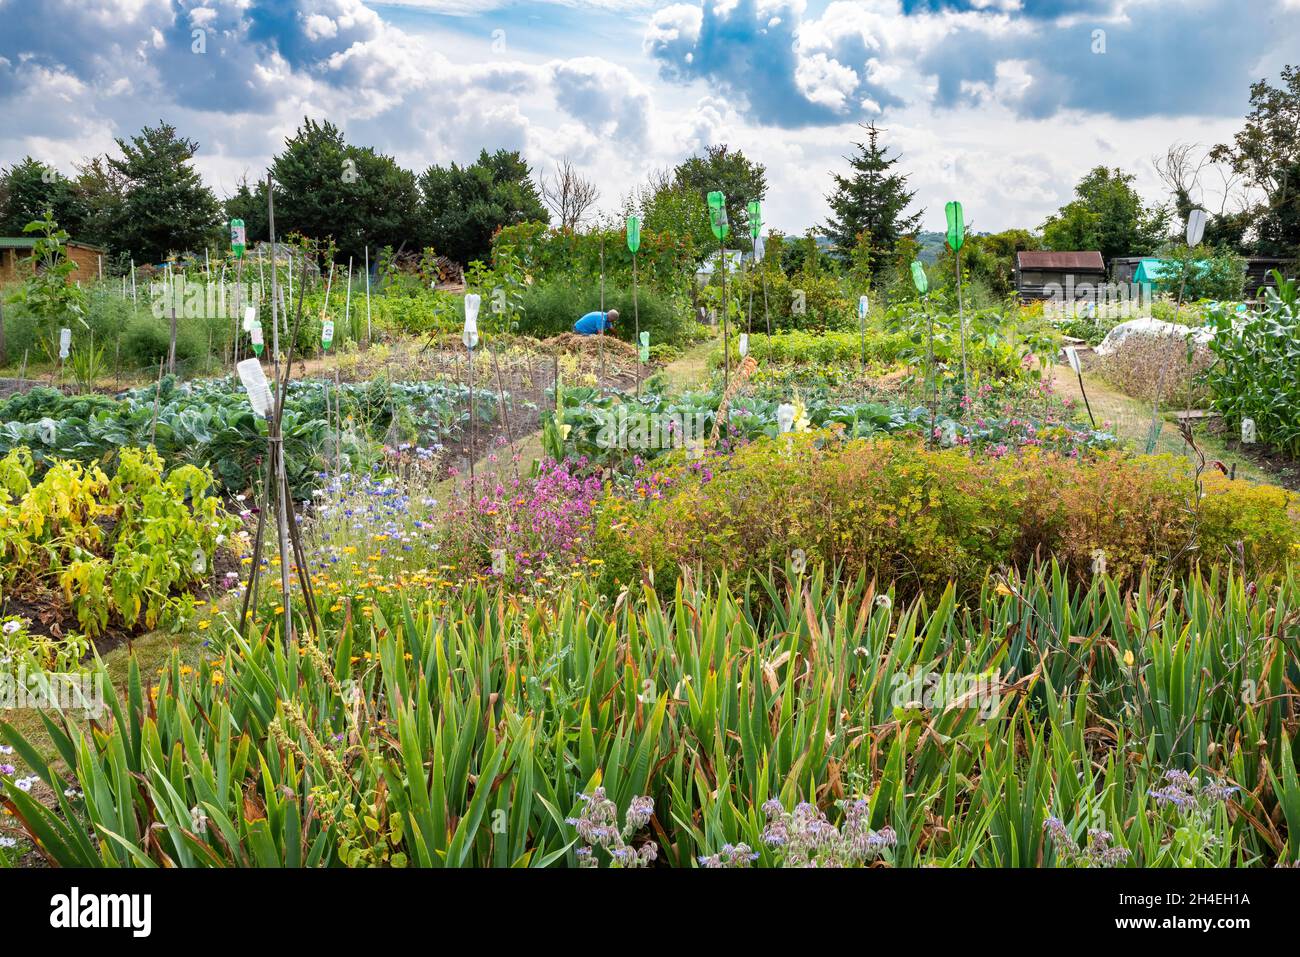 English allotments full of crops and flowers in summer. Stock Photo